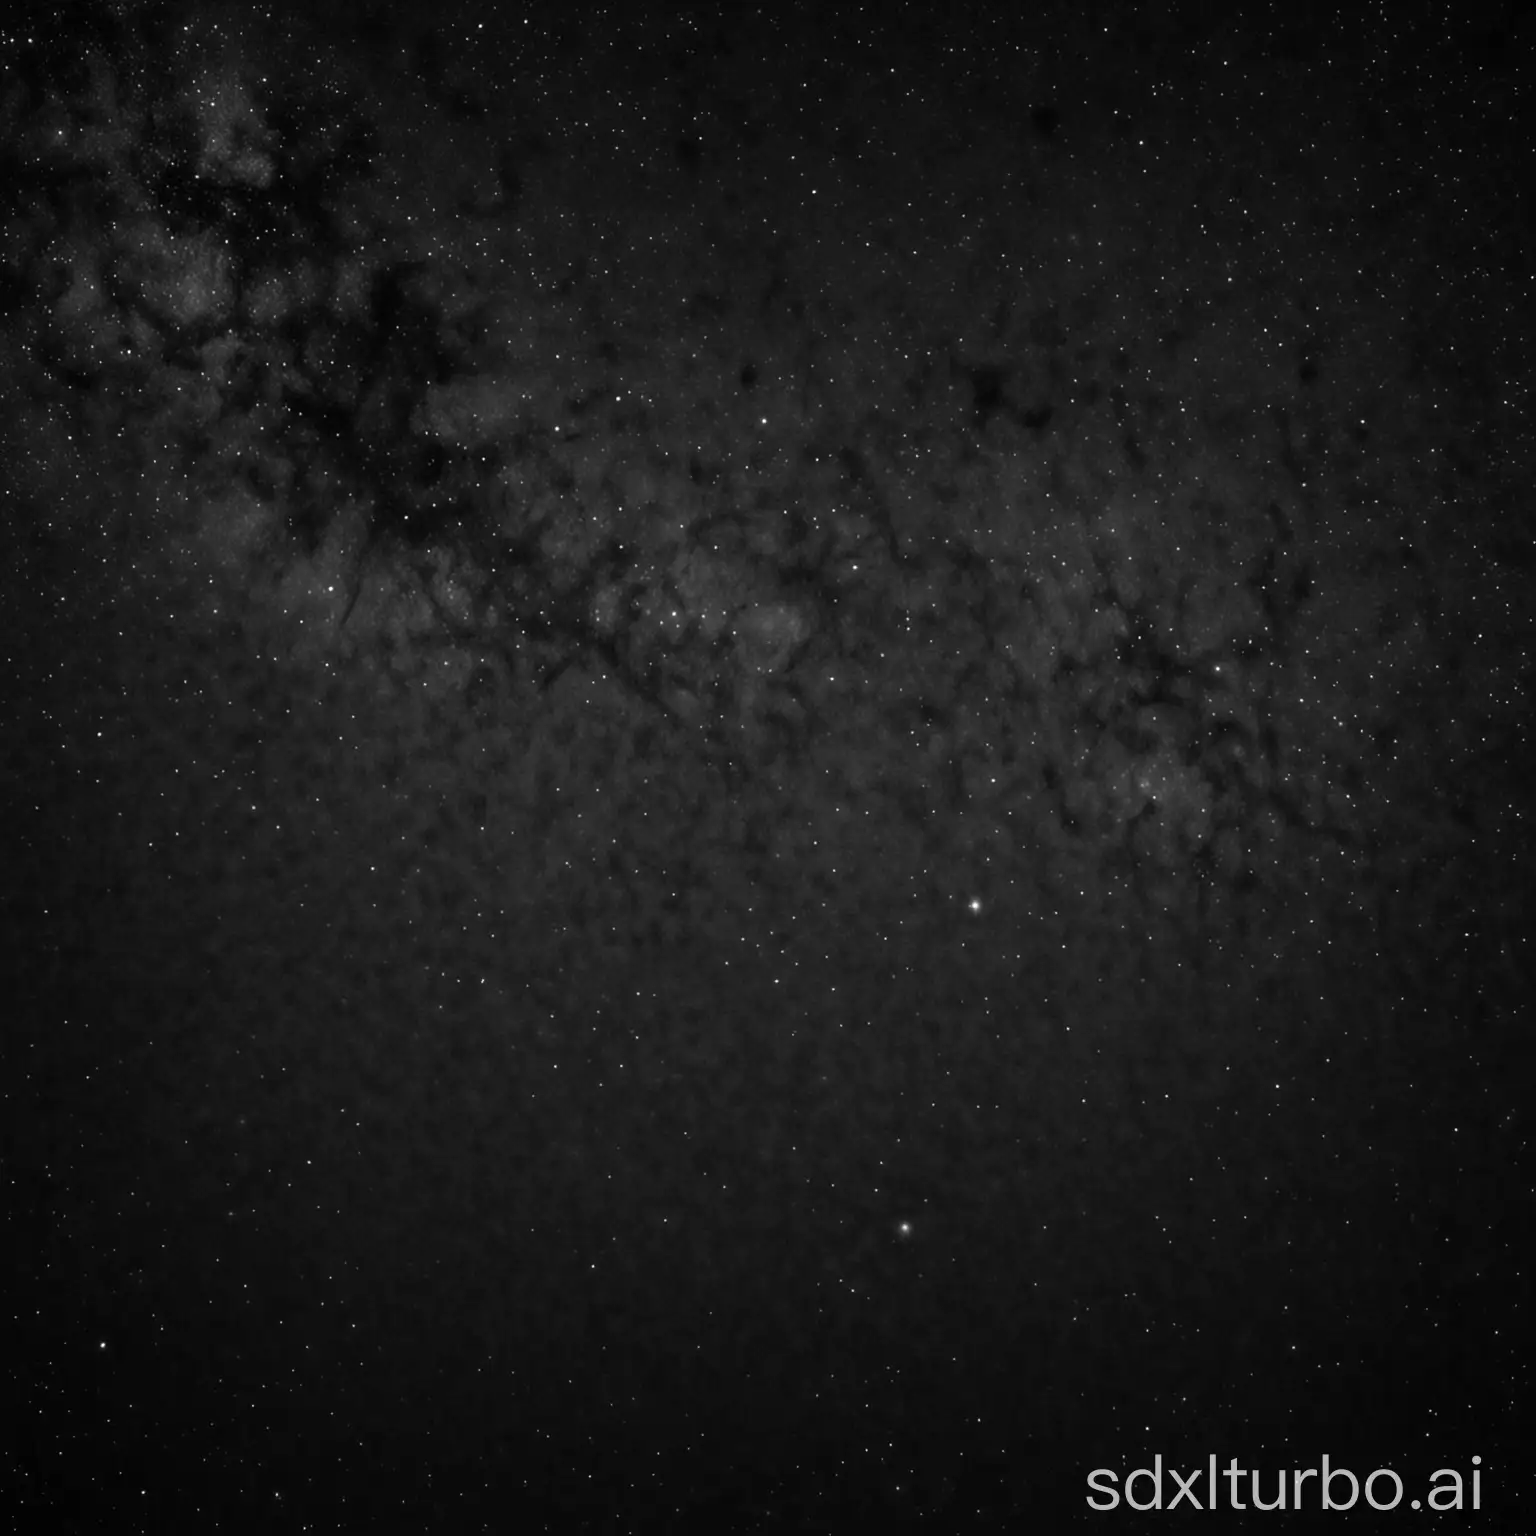 A space background with mostly black emptiness and a few small stars